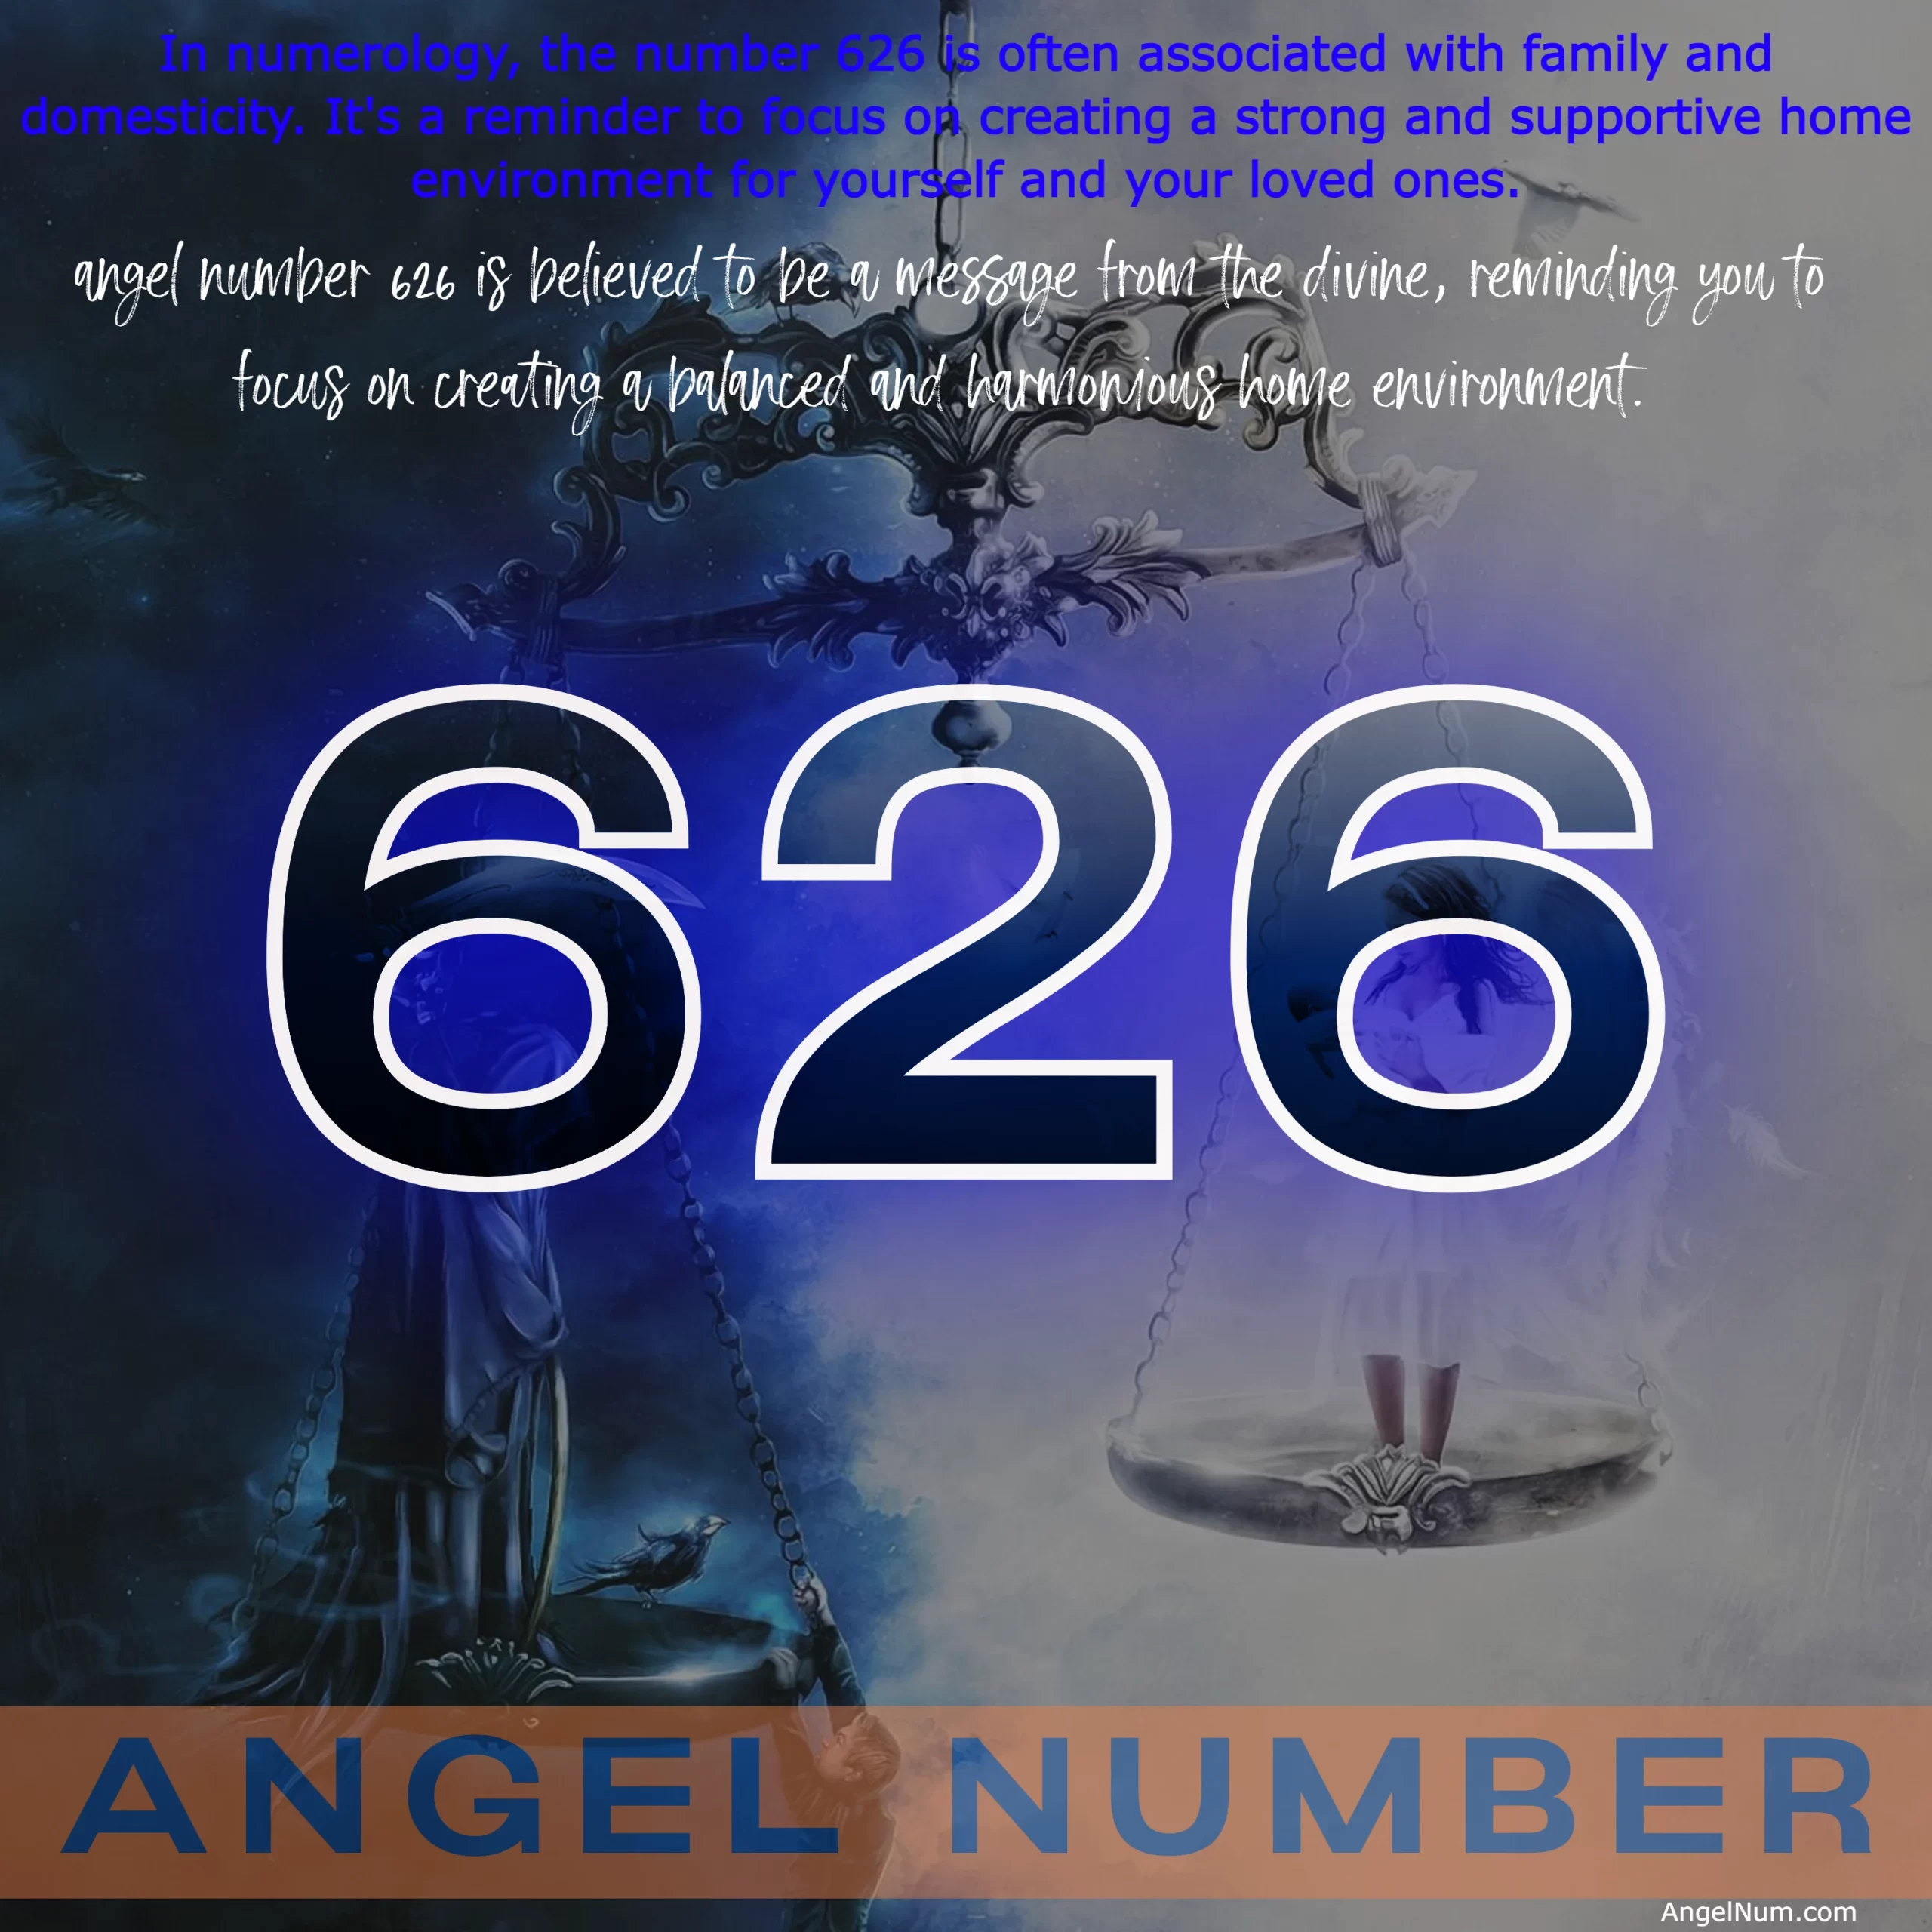 Discover the Meaning and Symbolism of Angel Number 626